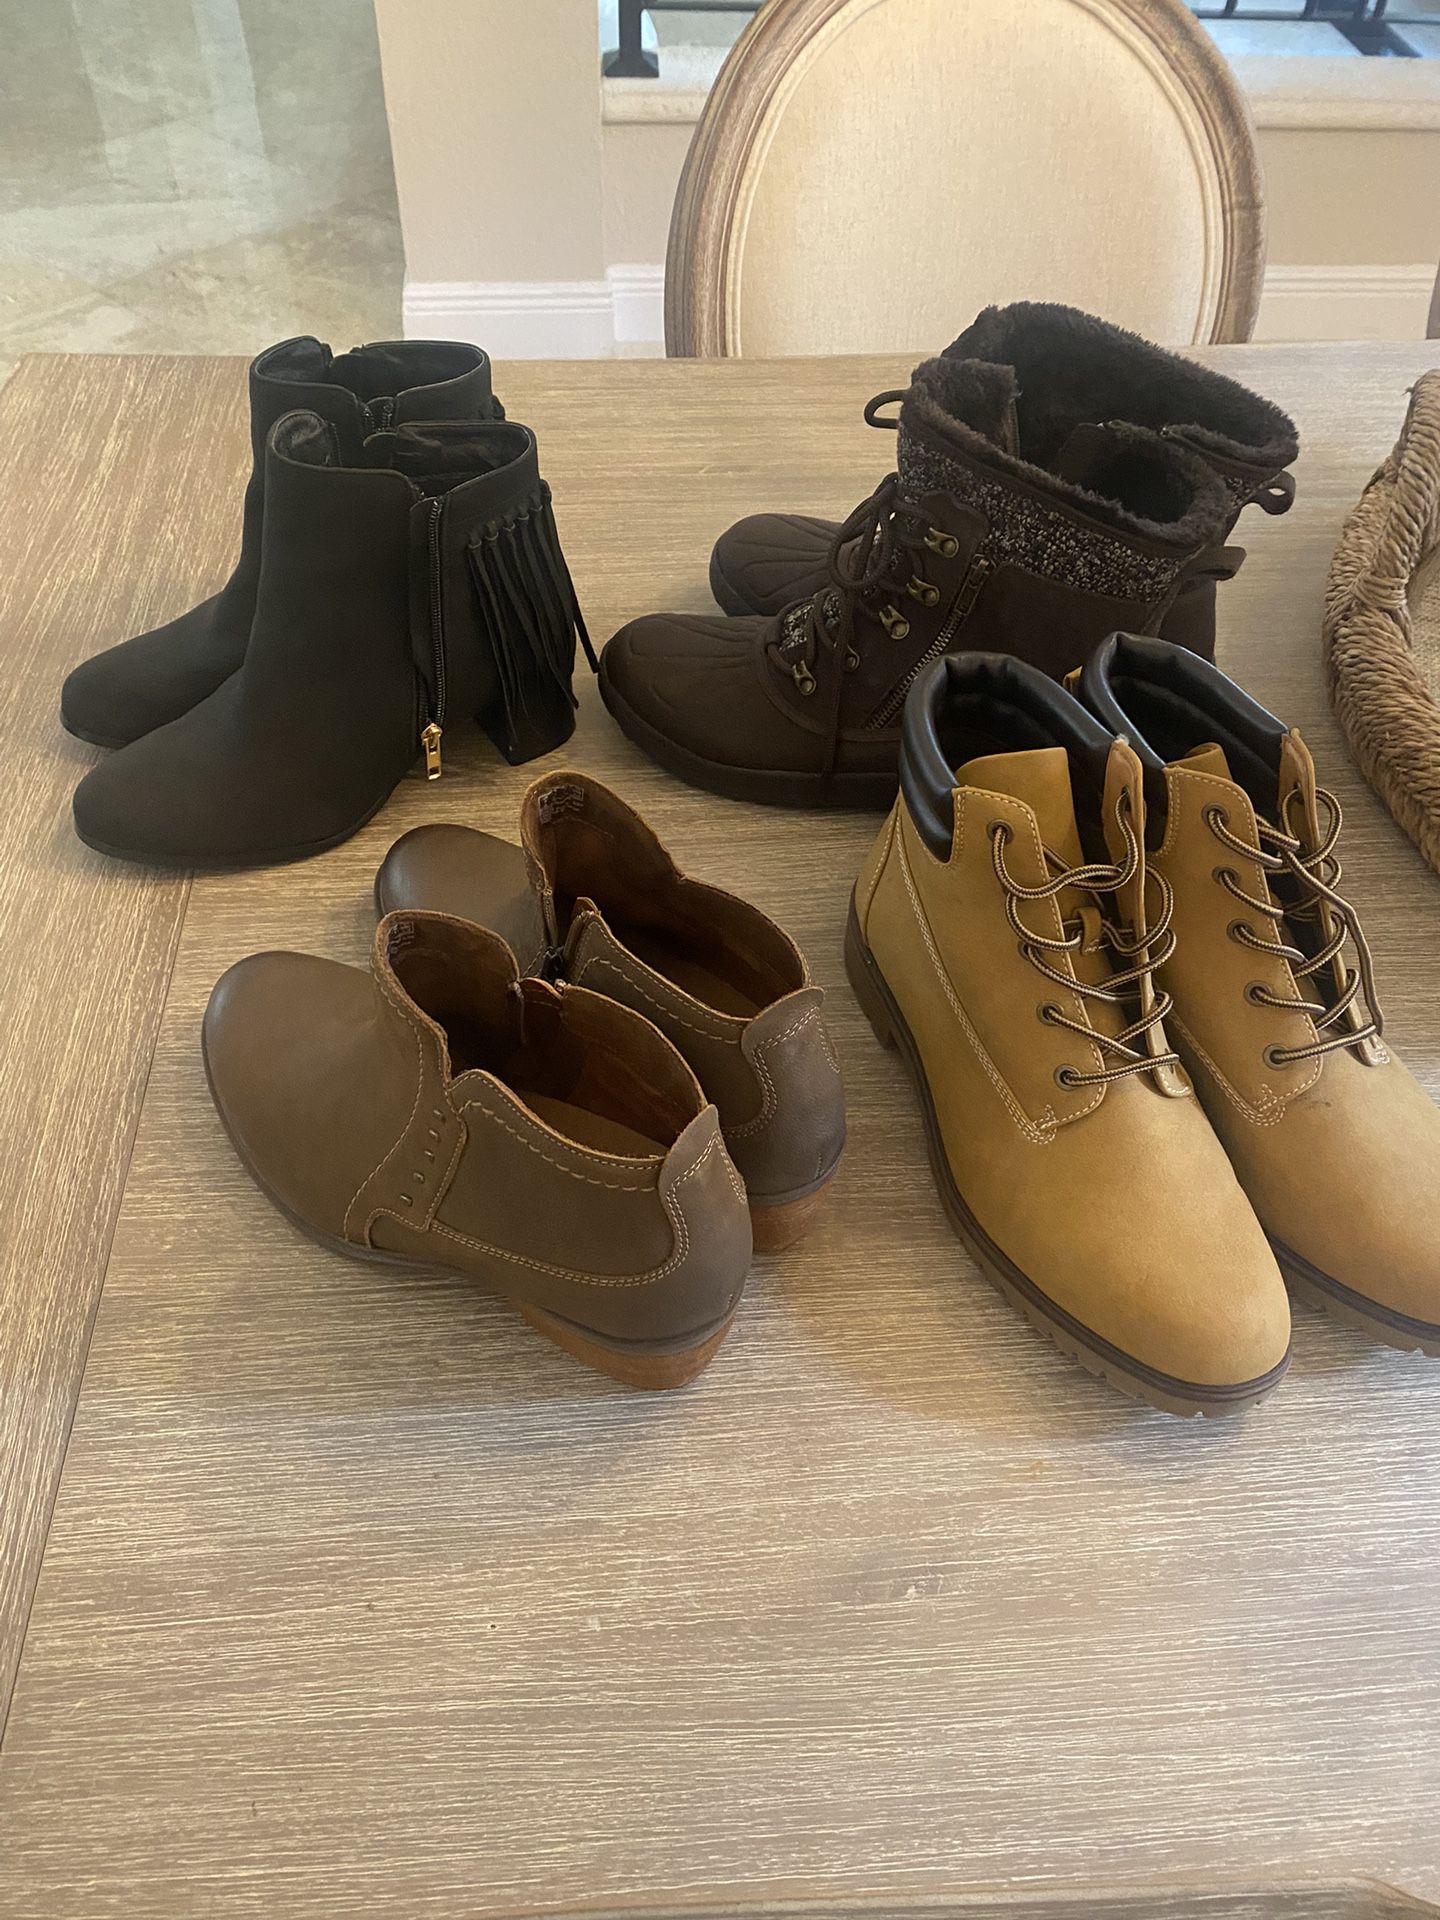 4 Cute And Great Condition Boots 